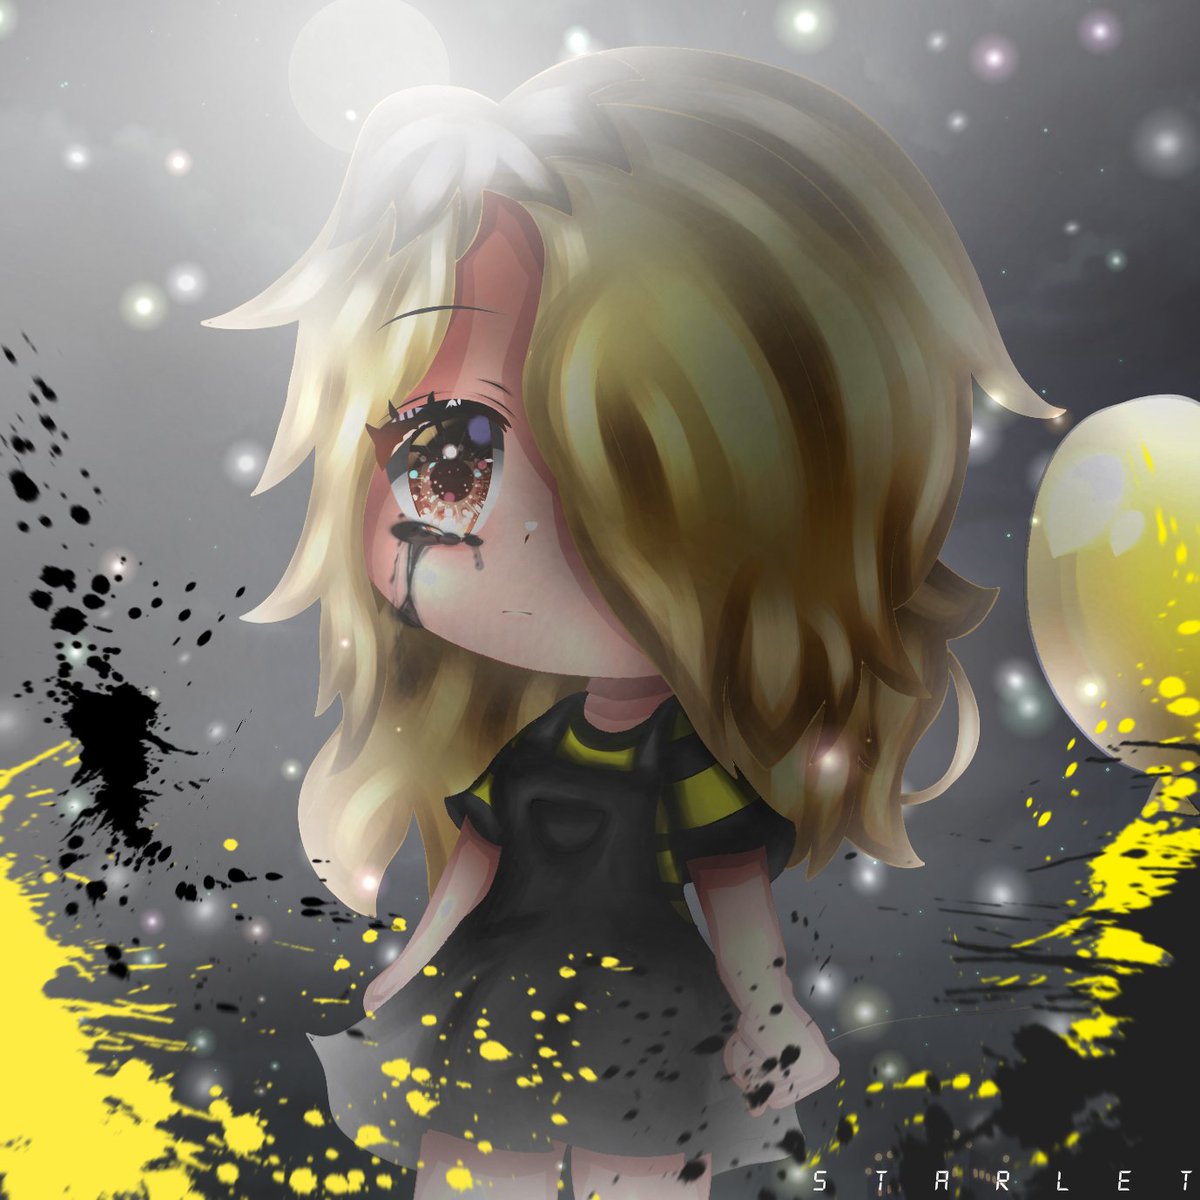 AViVA black and yellow splash.

Edit credit: @starlette_buns for @thisisaviva
Socials: @starlette_buns (INSTAGRAM), @thisisaviva (INSTAGRAM)

Don’t forget to send your best edits to MyGachaEdits@gmail.com for a chance to be featured! 📩